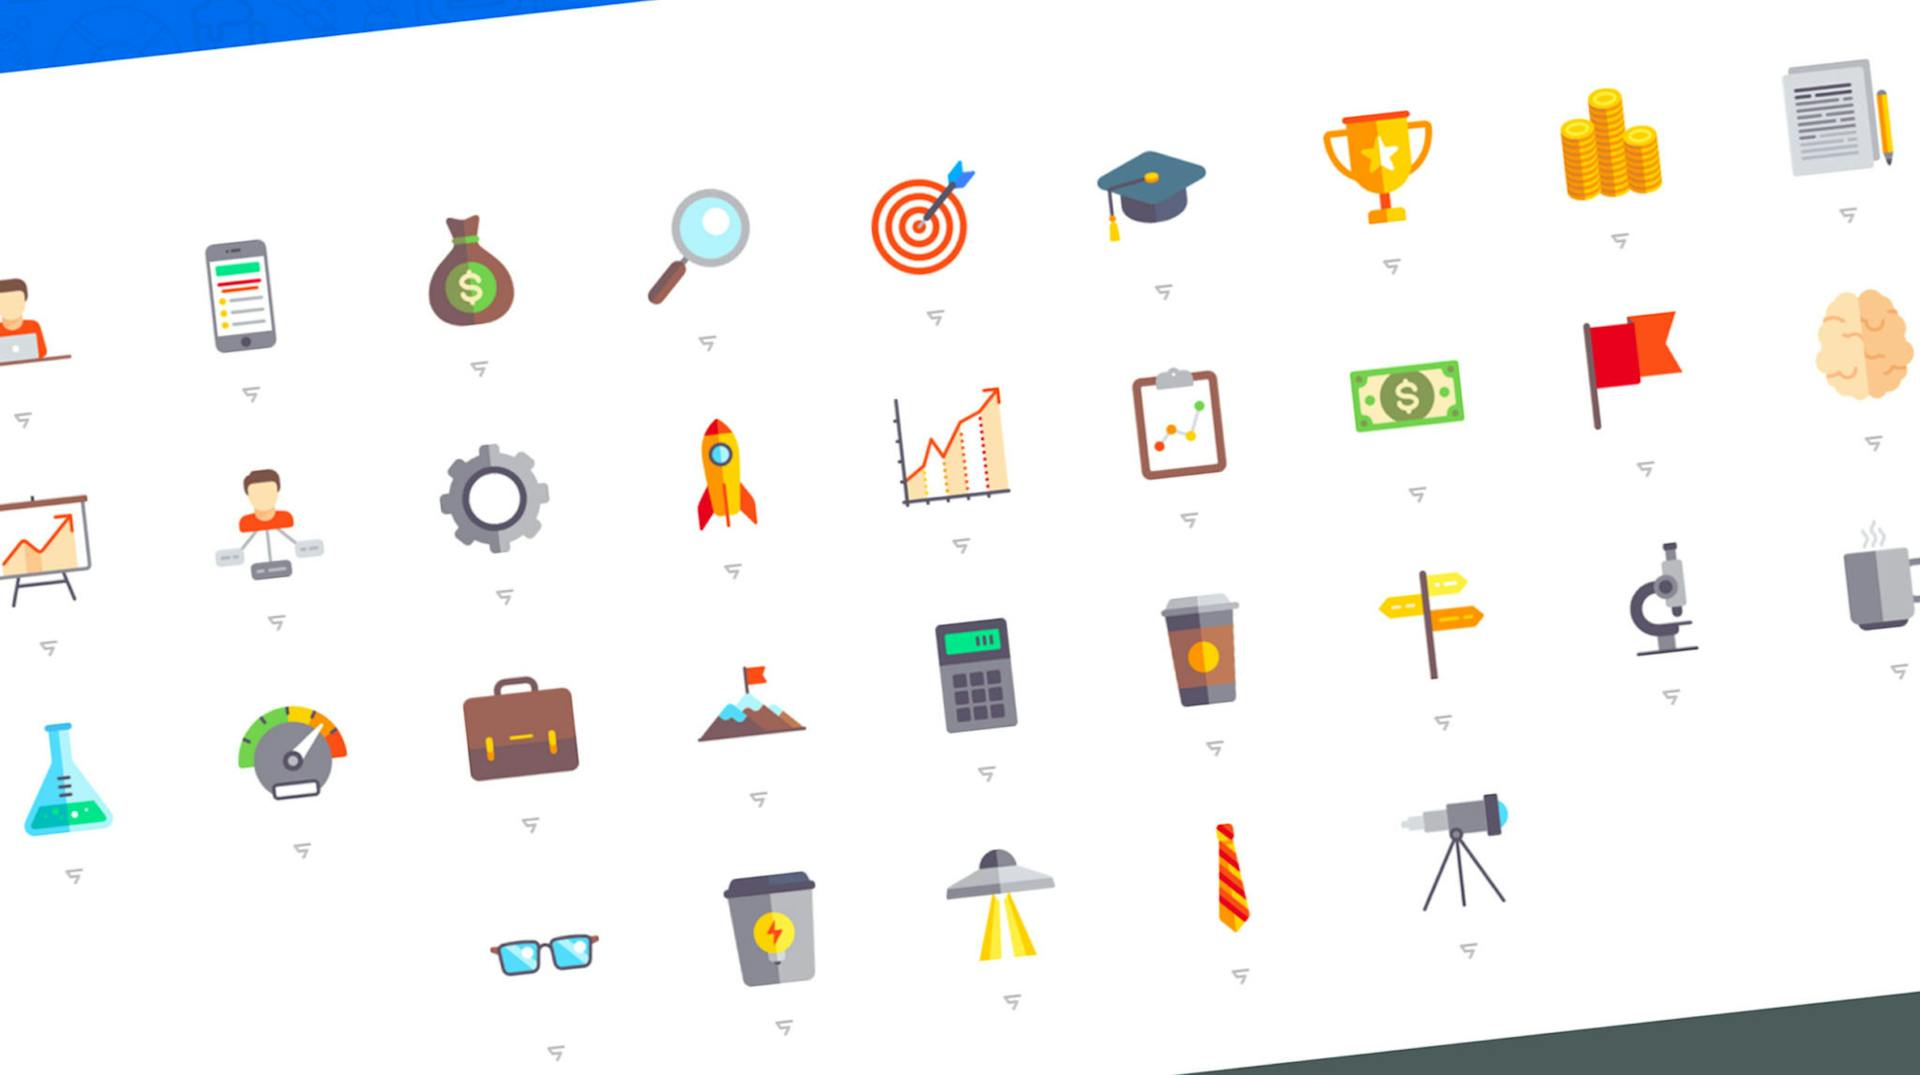 Great Collection of Free Vector Icons and Pictograms for